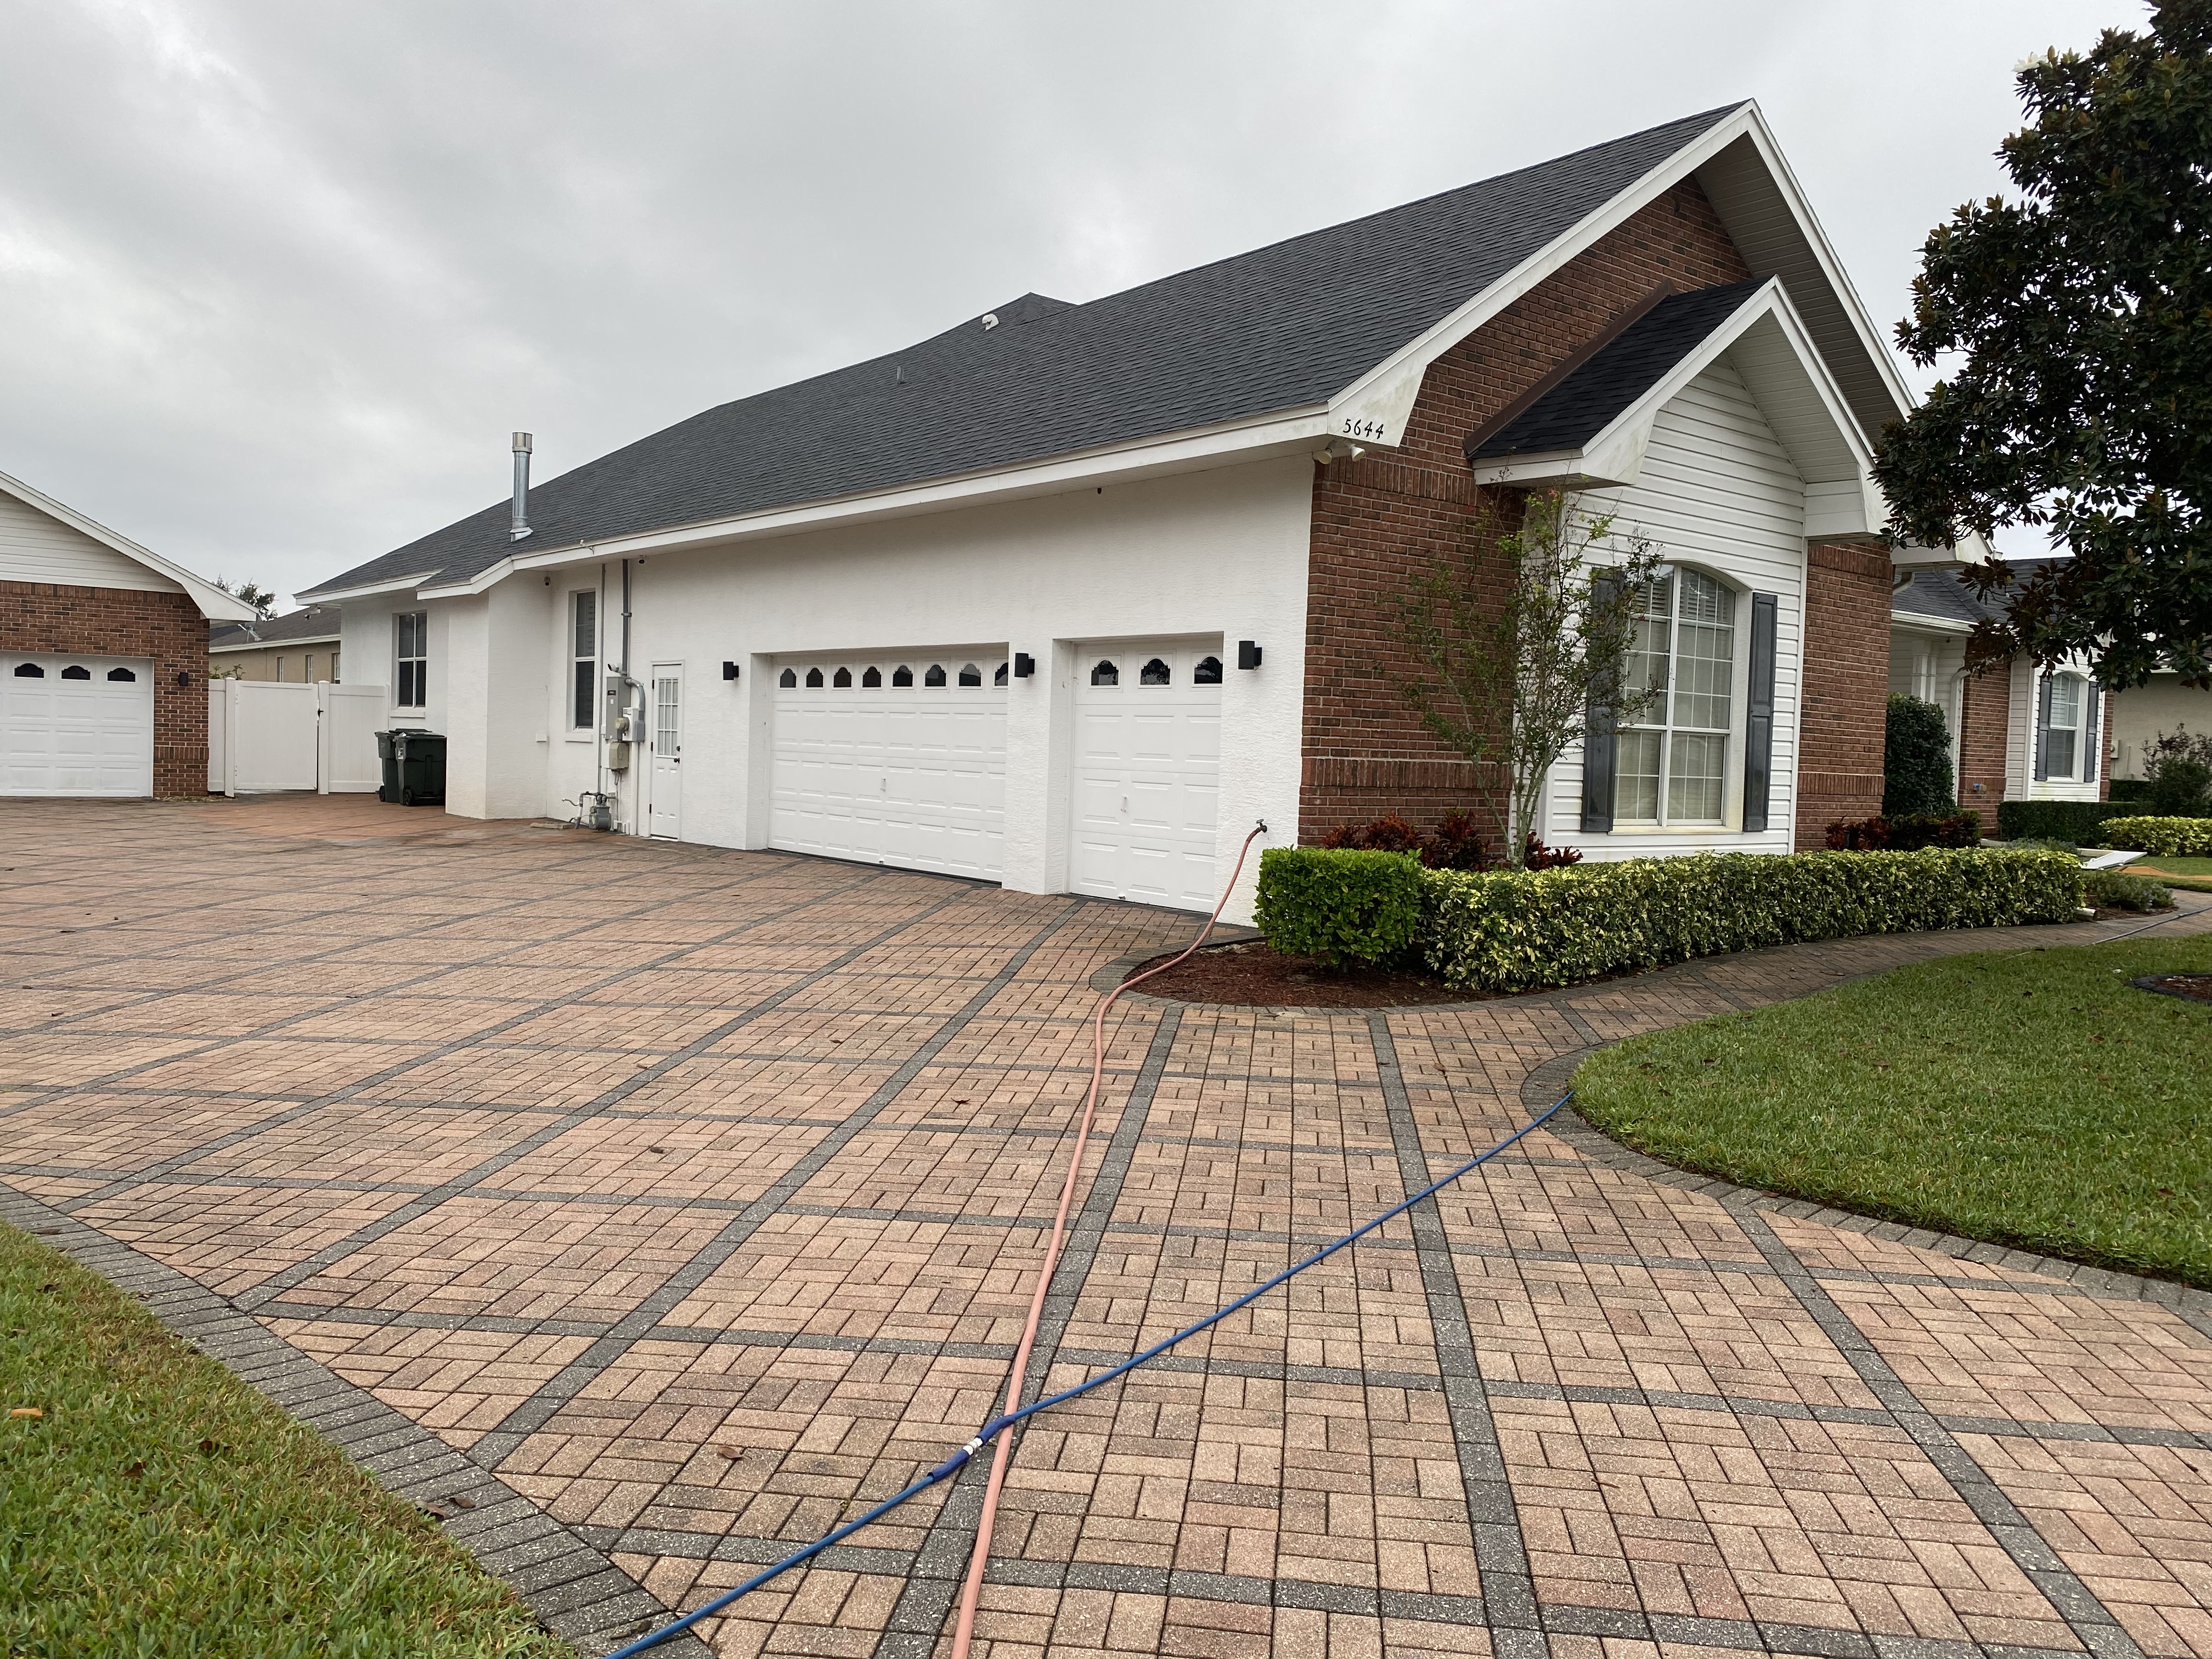 House Wash & Driveway Cleaning in Lakeland Fl